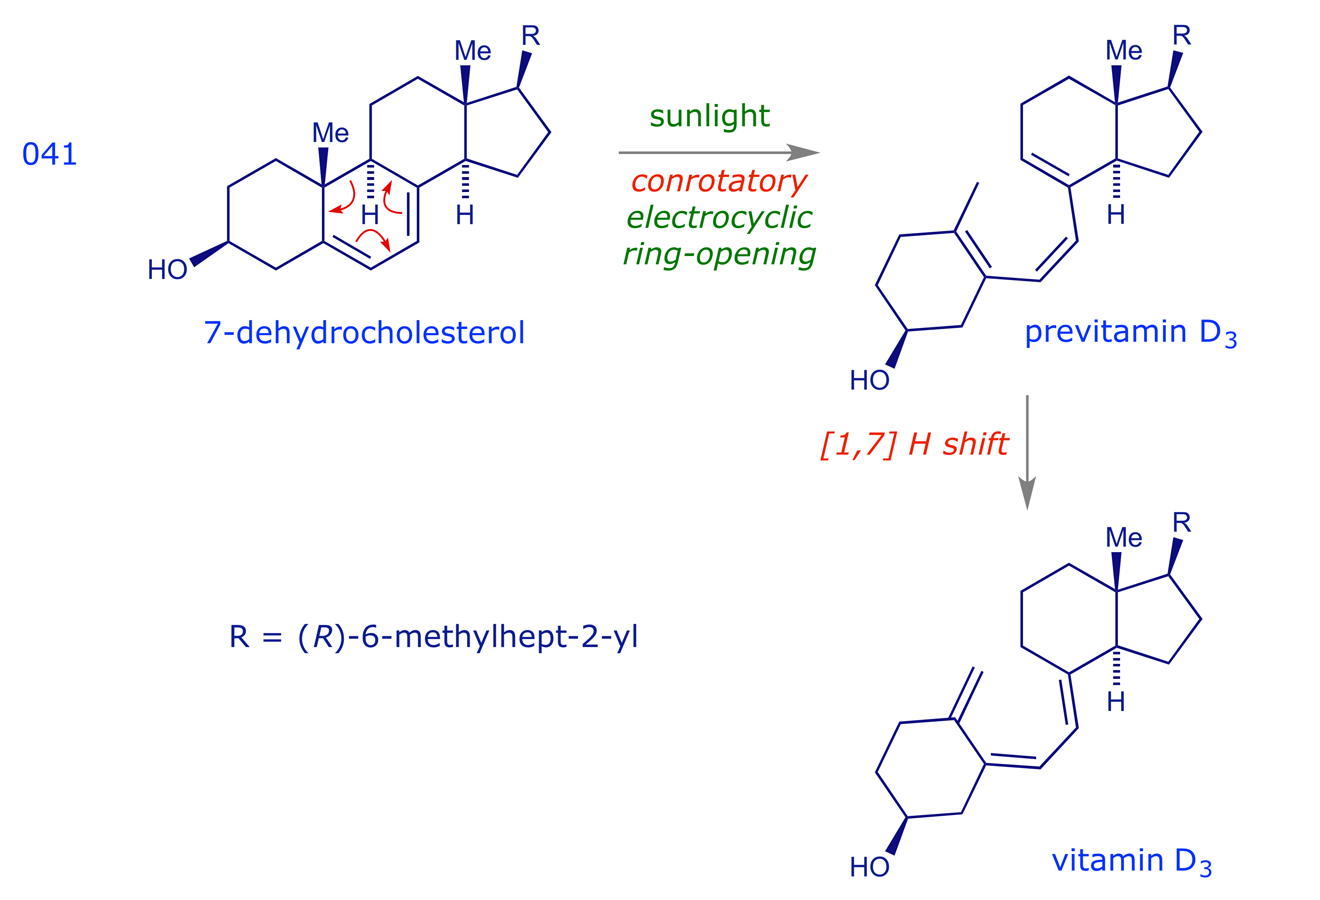 Photochemical electrocyclic ring-opening of 7-dehydrocholesterol leading to vitamin D<sub>3</sub>